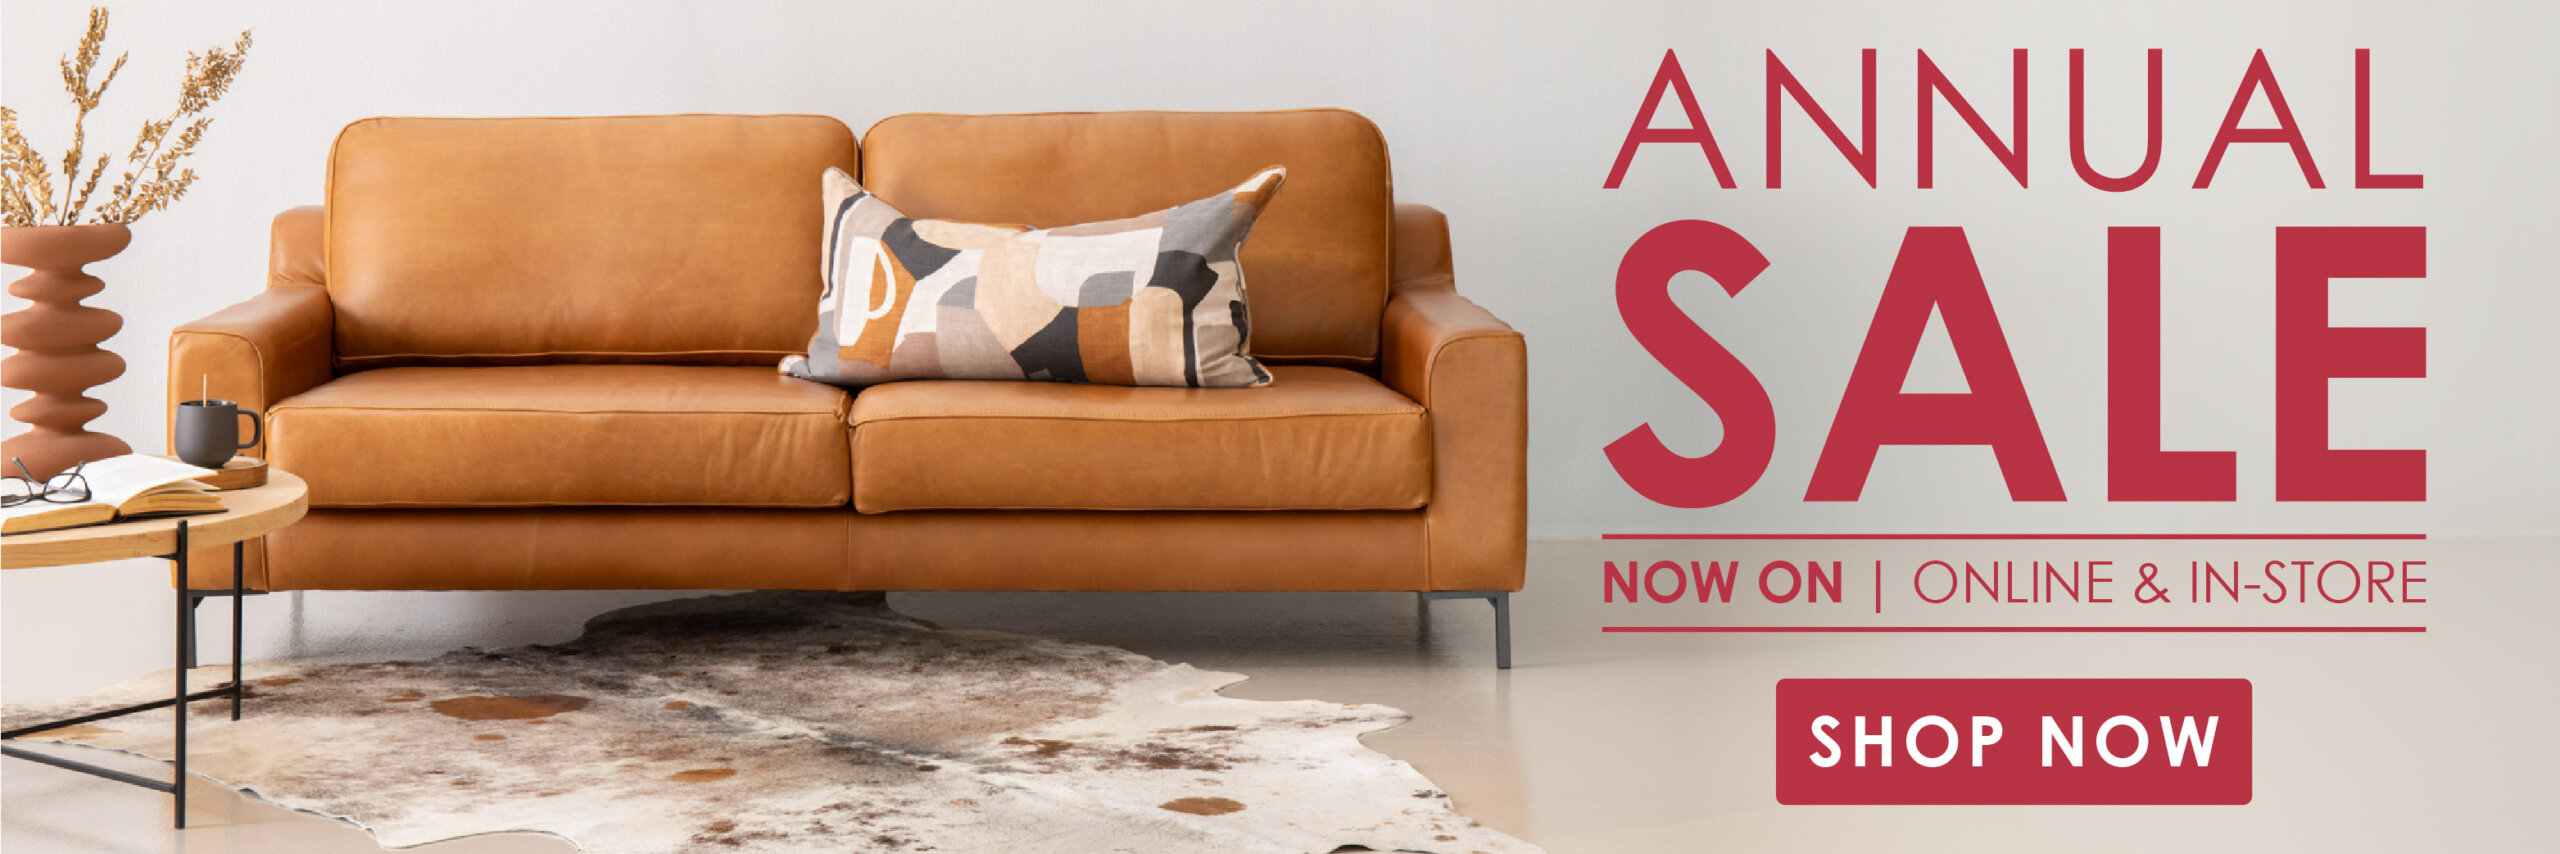 annual-sale-banner-leather-couches